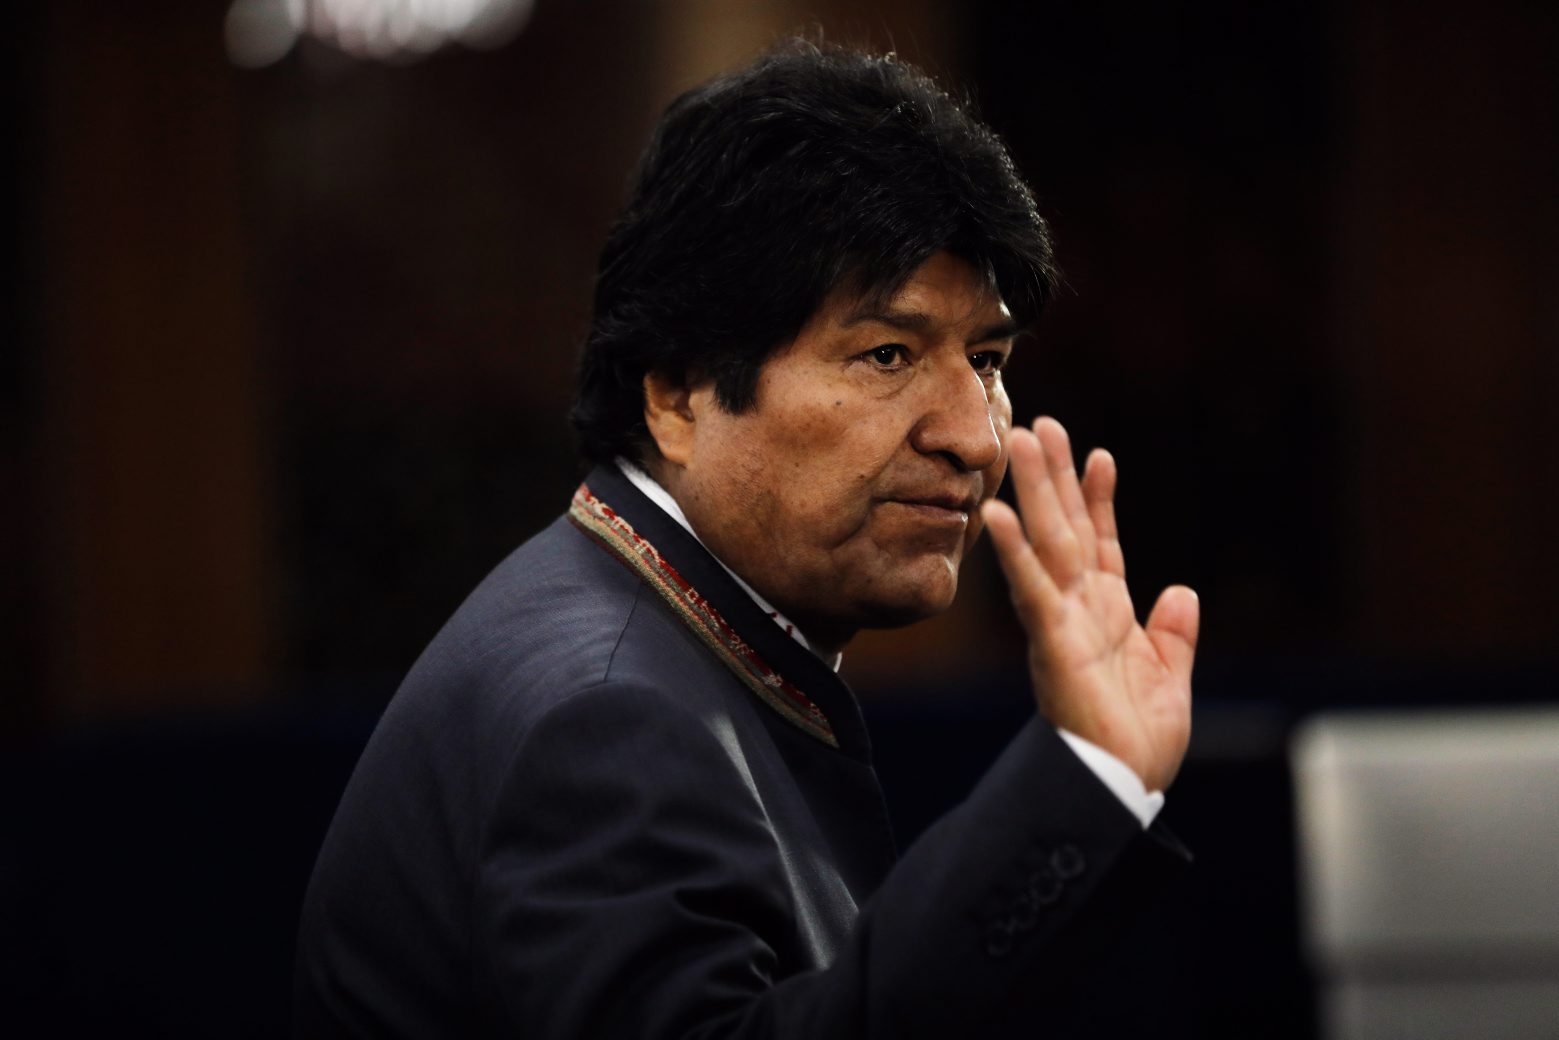 epaselect epa07986944 (FILE) Evo Morales, President of Bolivia arrives for the 2019 Climate Action Summit which is being held in advance of the General Debate of the General Assembly of the United Nations at United Nations Headquarters in New York, New York, USA, 23 September 2019 (reissued 10 November 2019). According to media reports on 10 November 2019, Bolivian President Evo Morales has announced his resignation. Morales had announced earlier in the day new general elections, following the report of the Organization of American States (OAS) that recommended the repetition of the first round of the elections held on October 20.  EPA/PETER FOLEY epaselect (FILE) USA BOLIVIA EVO MORALES RESIGNS